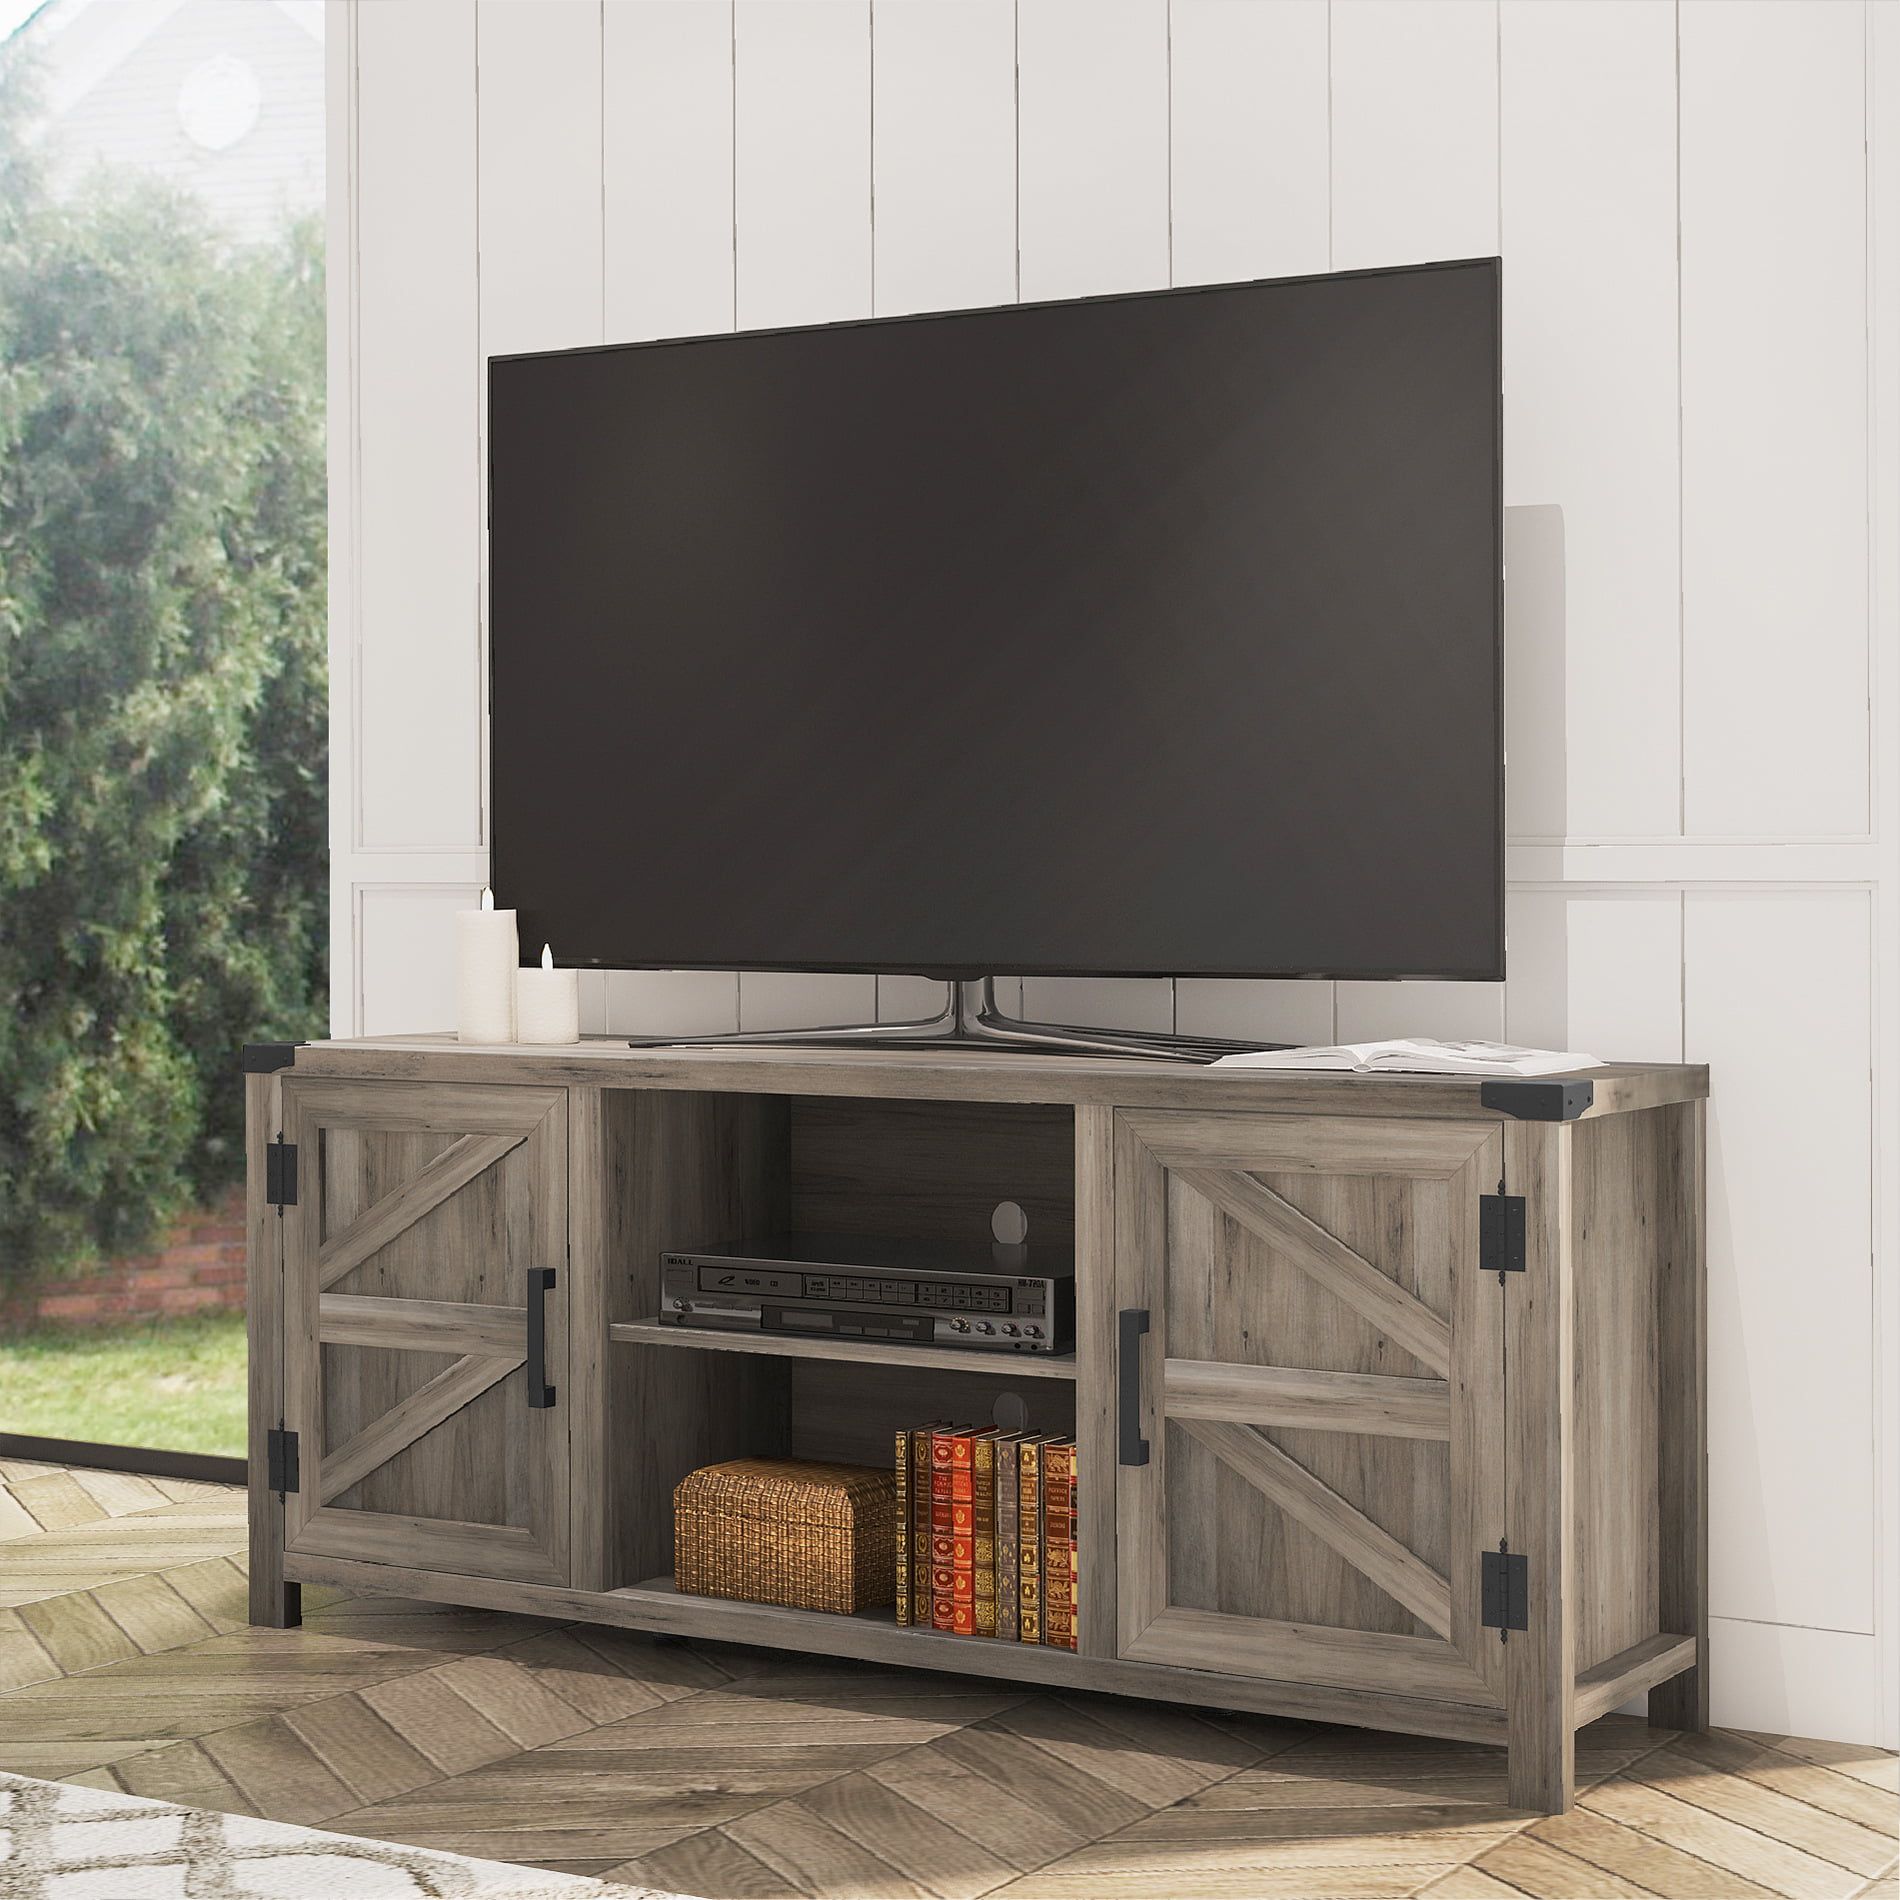 Fitueyes Farmhouse Barn Door Wood Tv Stands For 70'' Flat Screen, Media With Farmhouse Media Entertainment Centers (View 7 of 20)